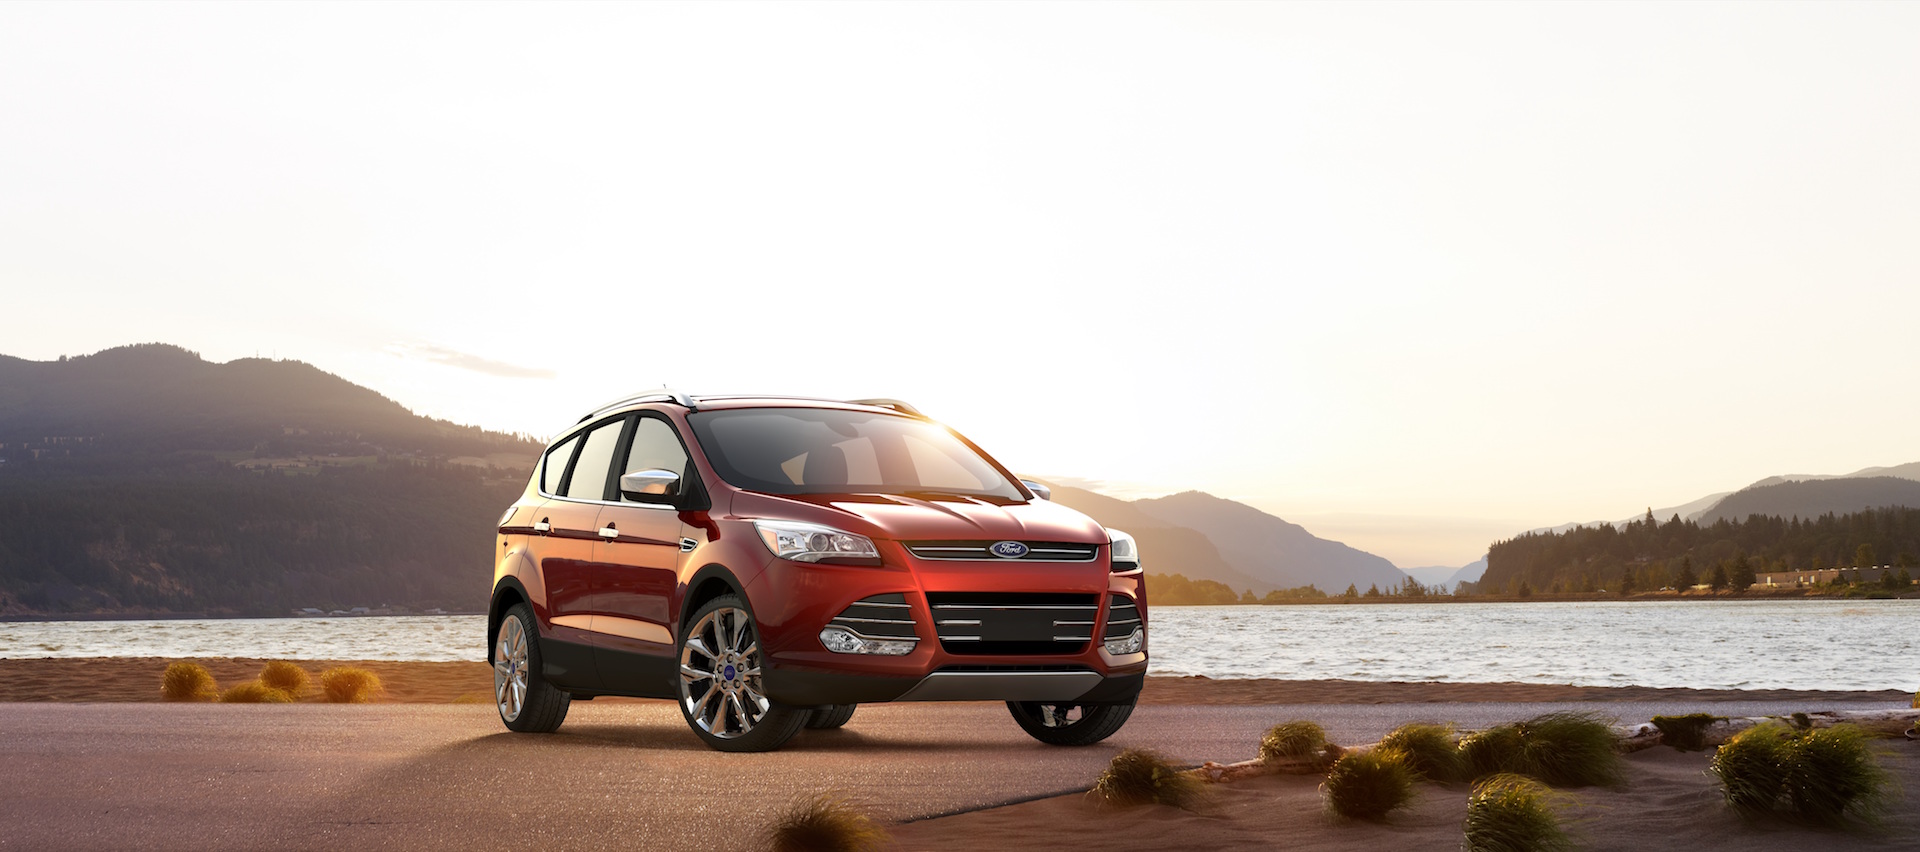 2016 Ford Escape Review Ratings Specs Prices And Photos The Car Connection